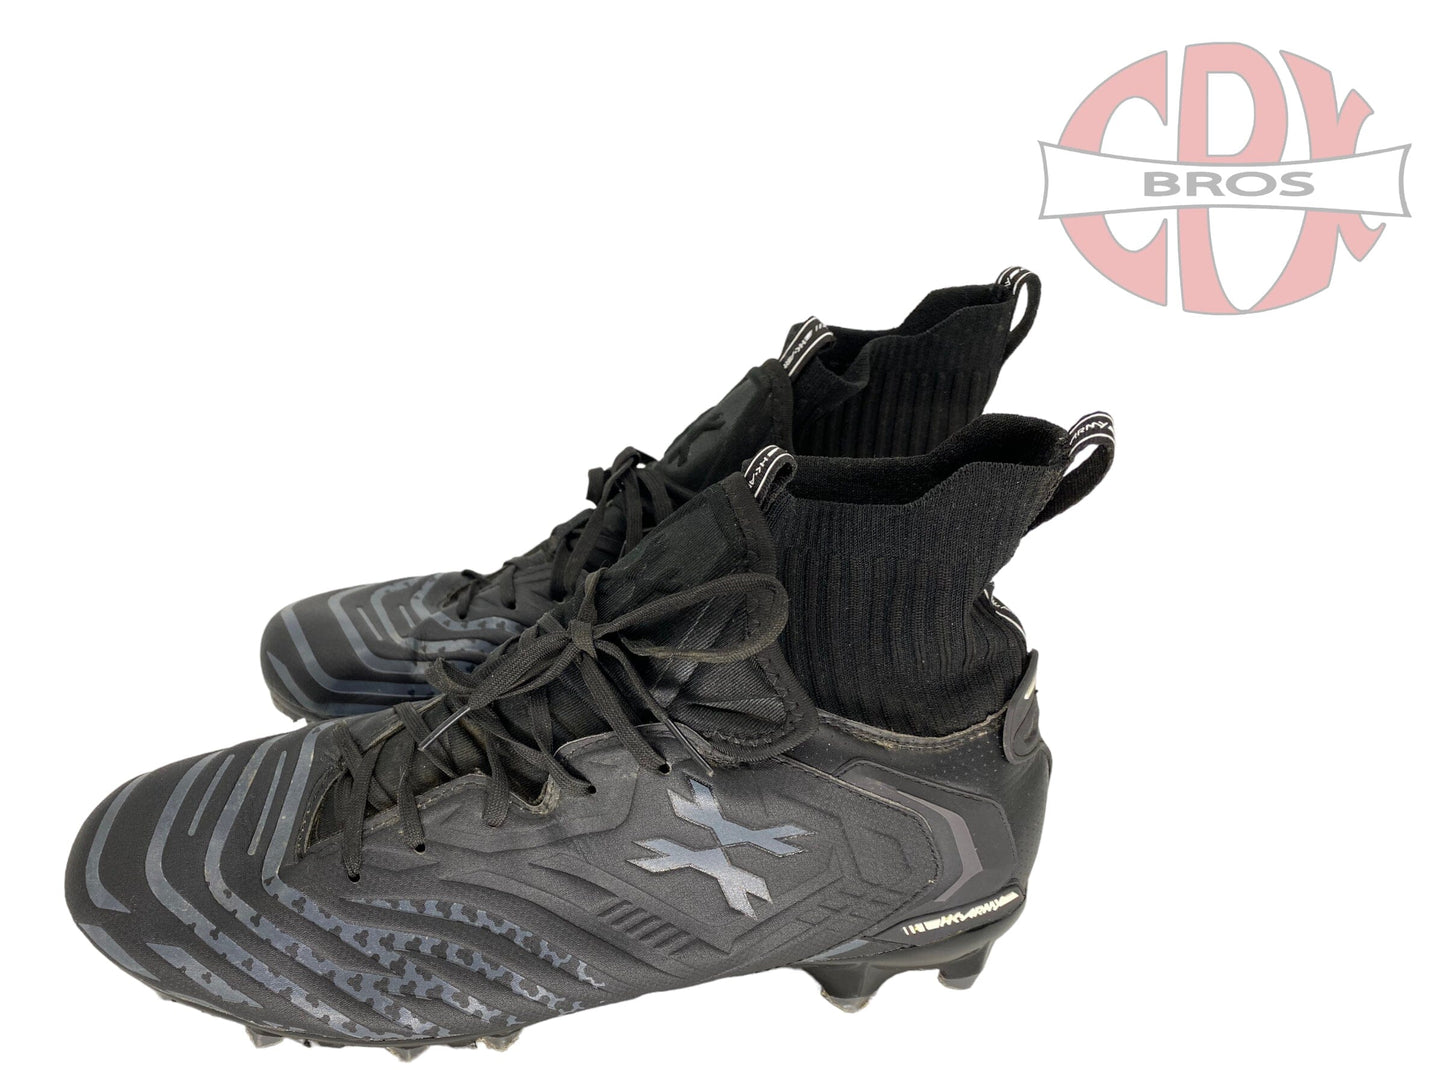 Used HK Army Diggerz LT Low Top Paintball Cleats - Black/Black- size 12/13 Paintball Gun from CPXBrosPaintball Buy/Sell/Trade Paintball Markers, Paintball Hoppers, Paintball Masks, and Hormesis Headbands